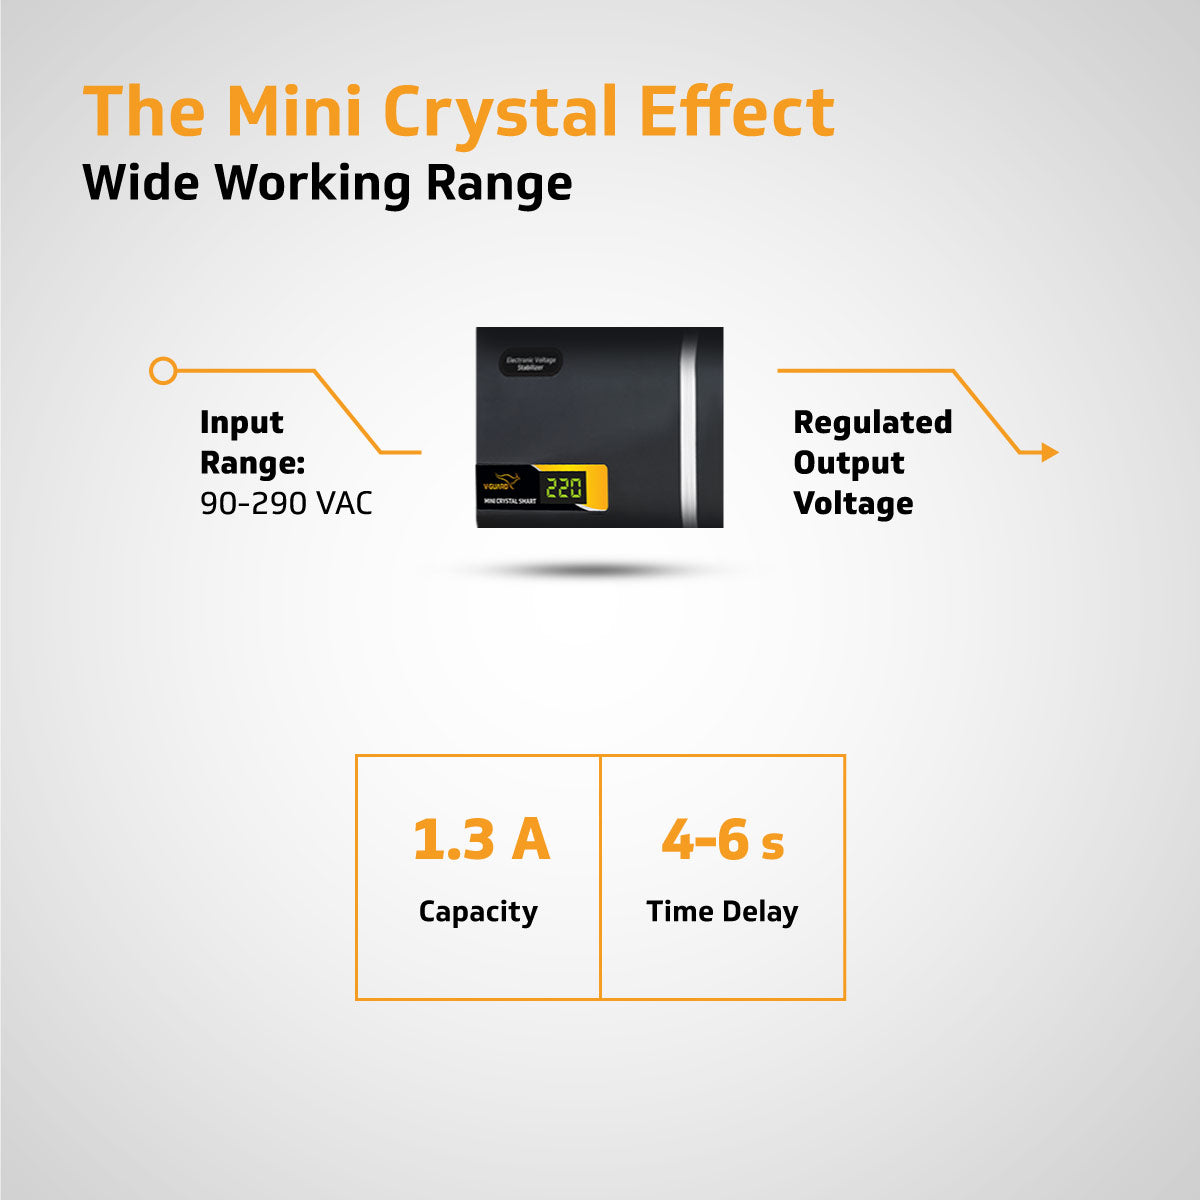 Mini Crystal Smart TV Stabilizer  Applicable for Smart TV's up to 82cm (32') +Set Top Box